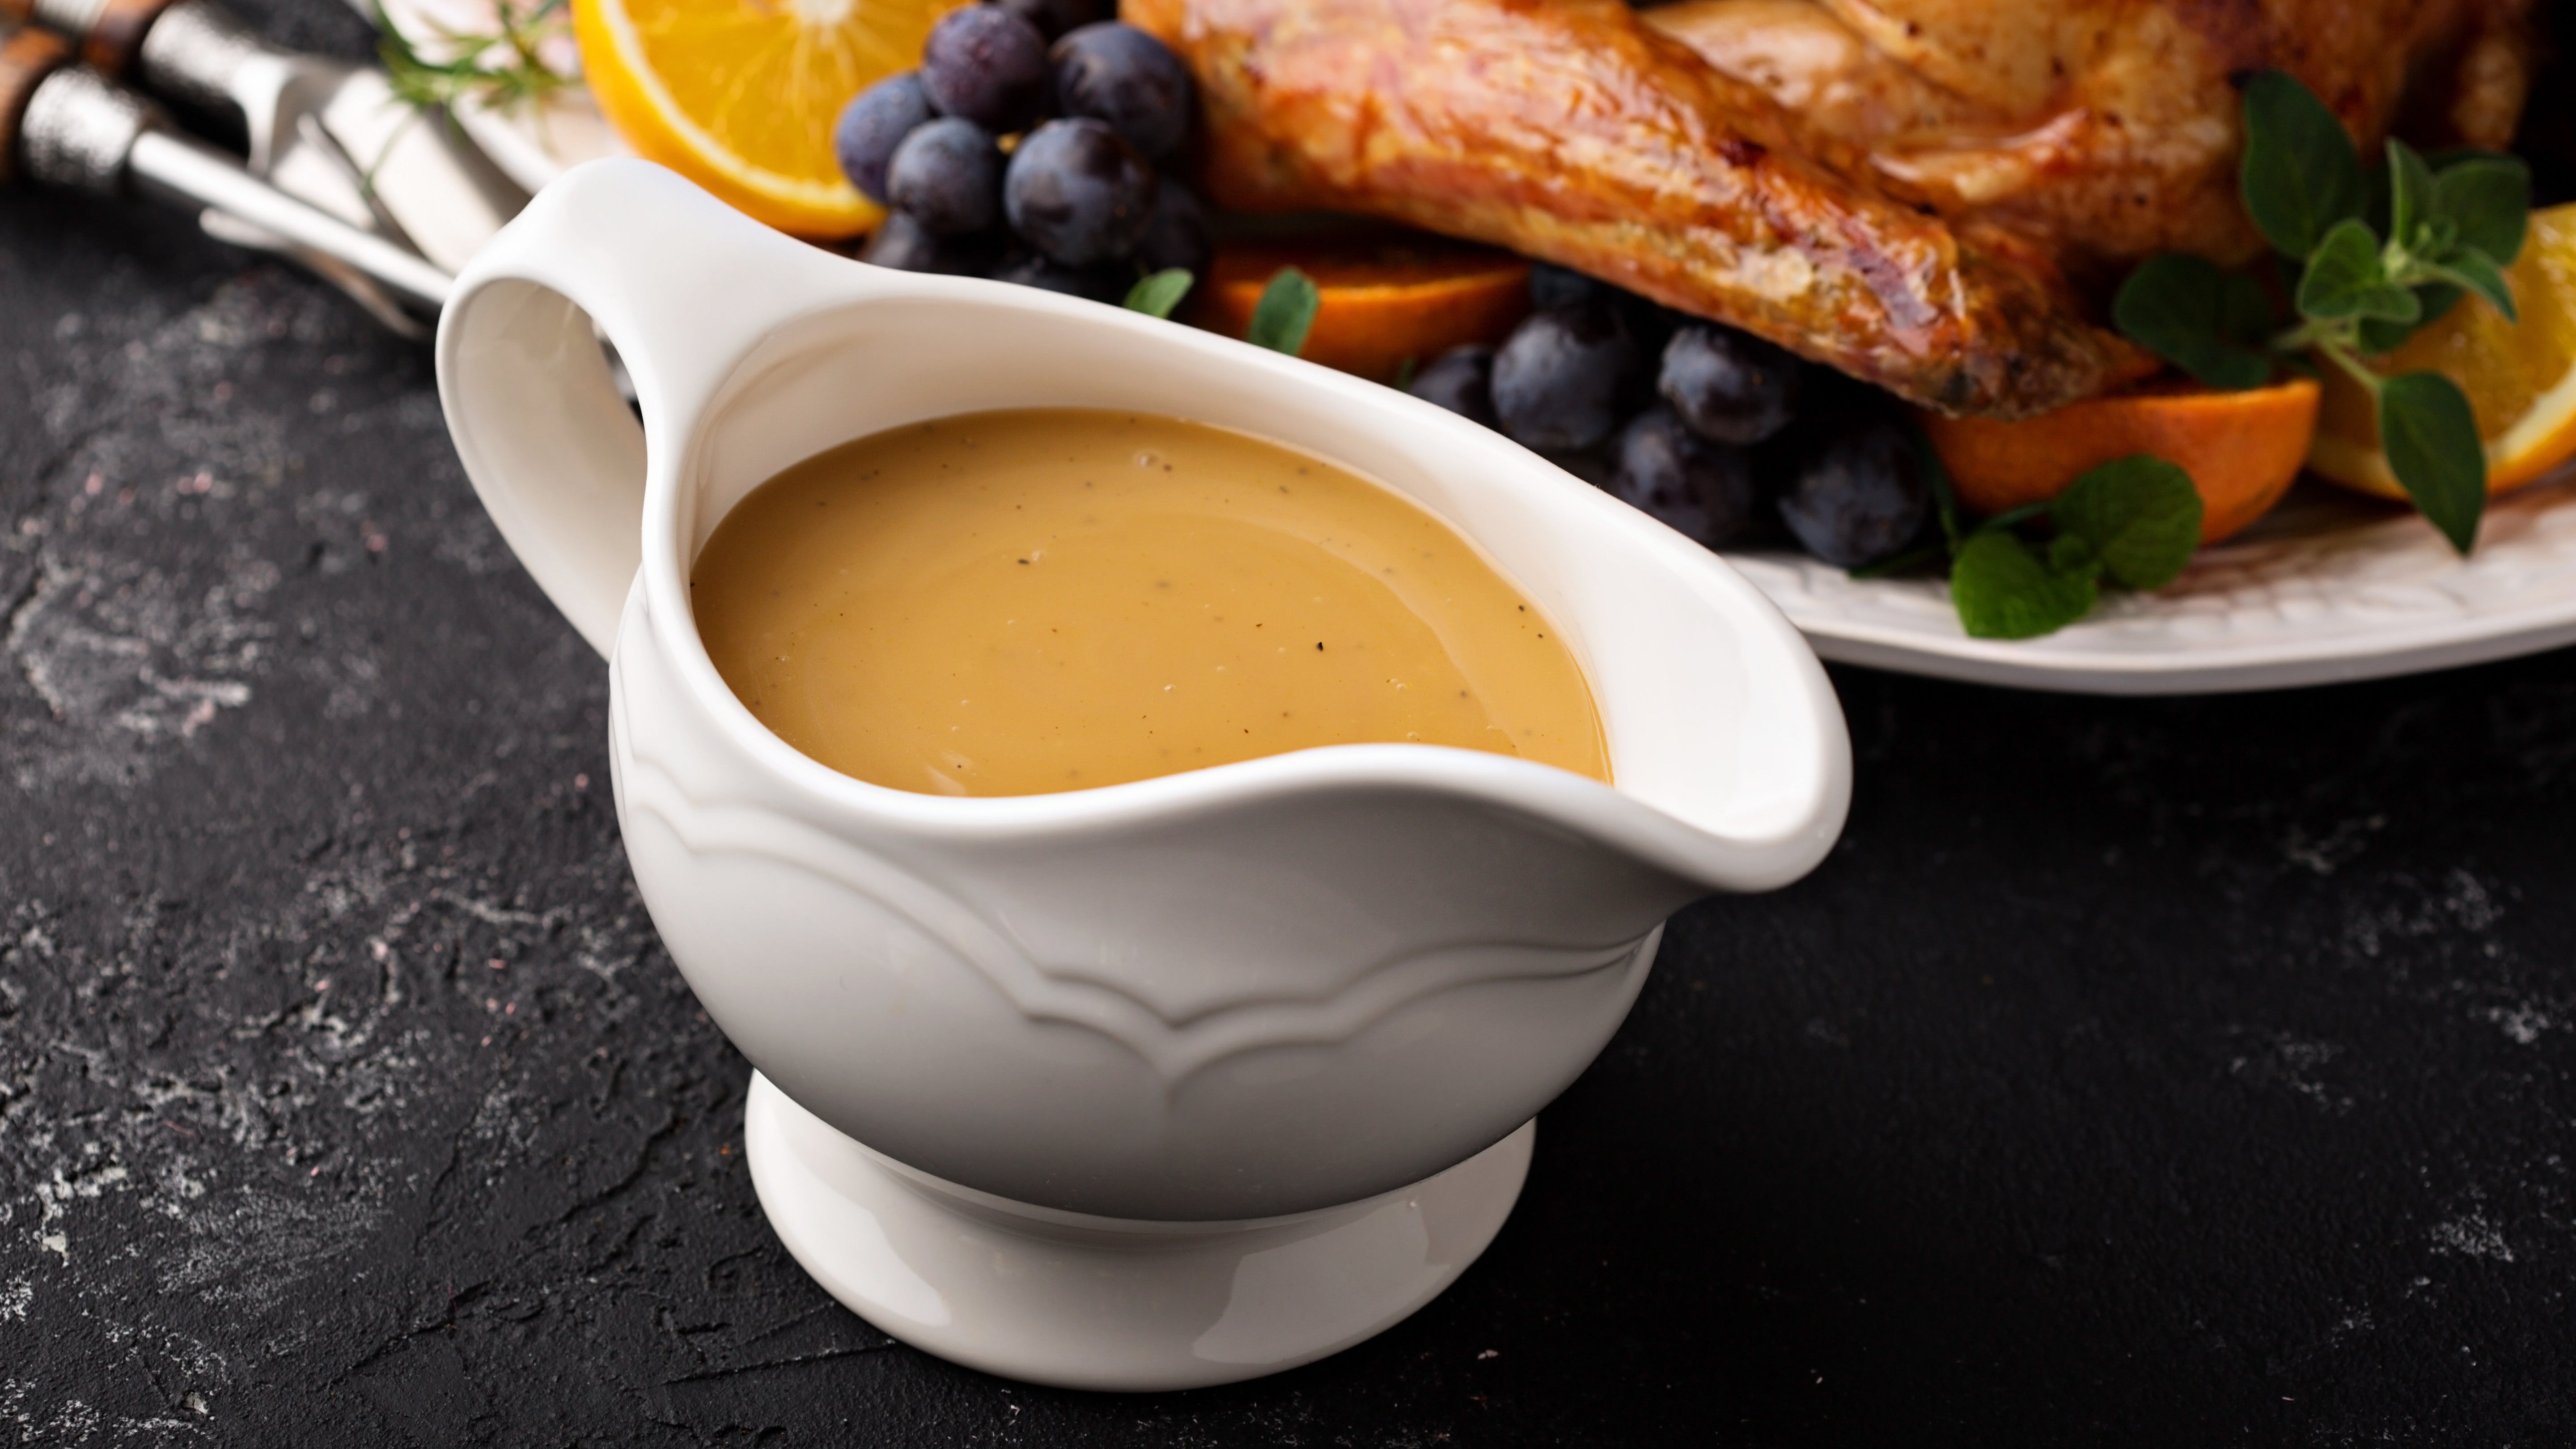 Liven Up Your Turkey Gravy With Nutritional Yeast